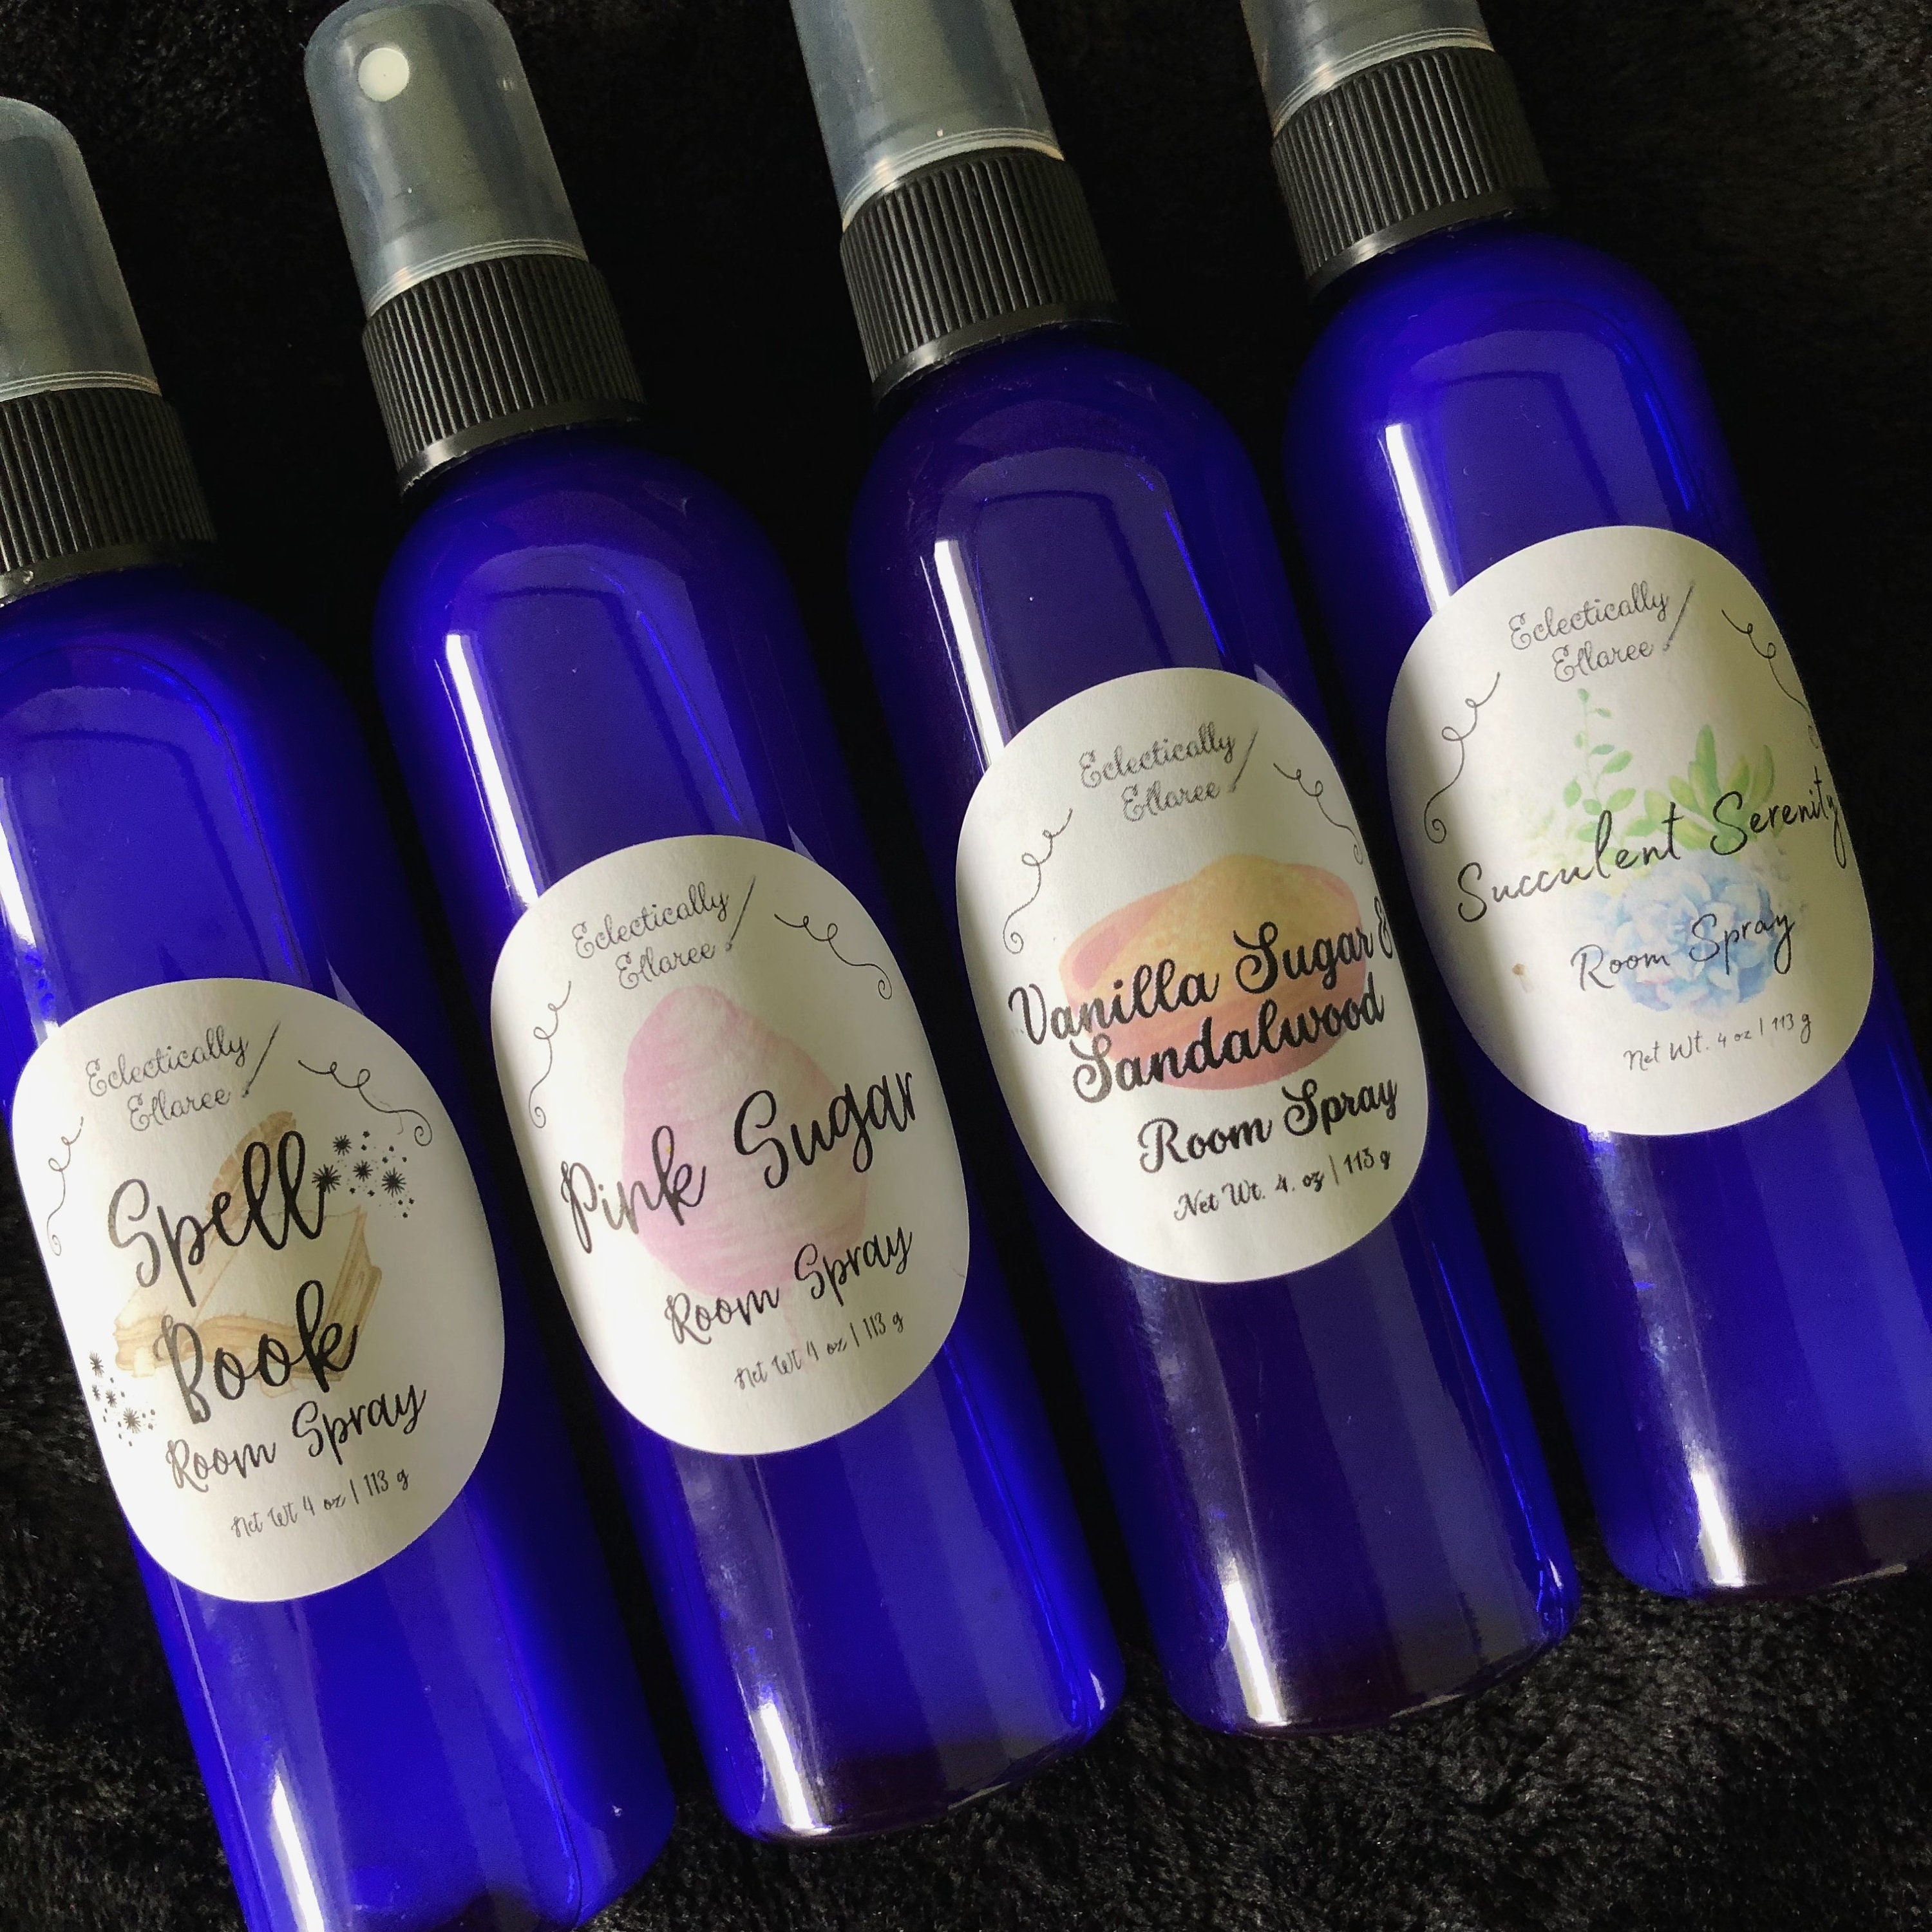 4 Oz. Choose Your Scent Spray Oil Pineapple Strawberry 